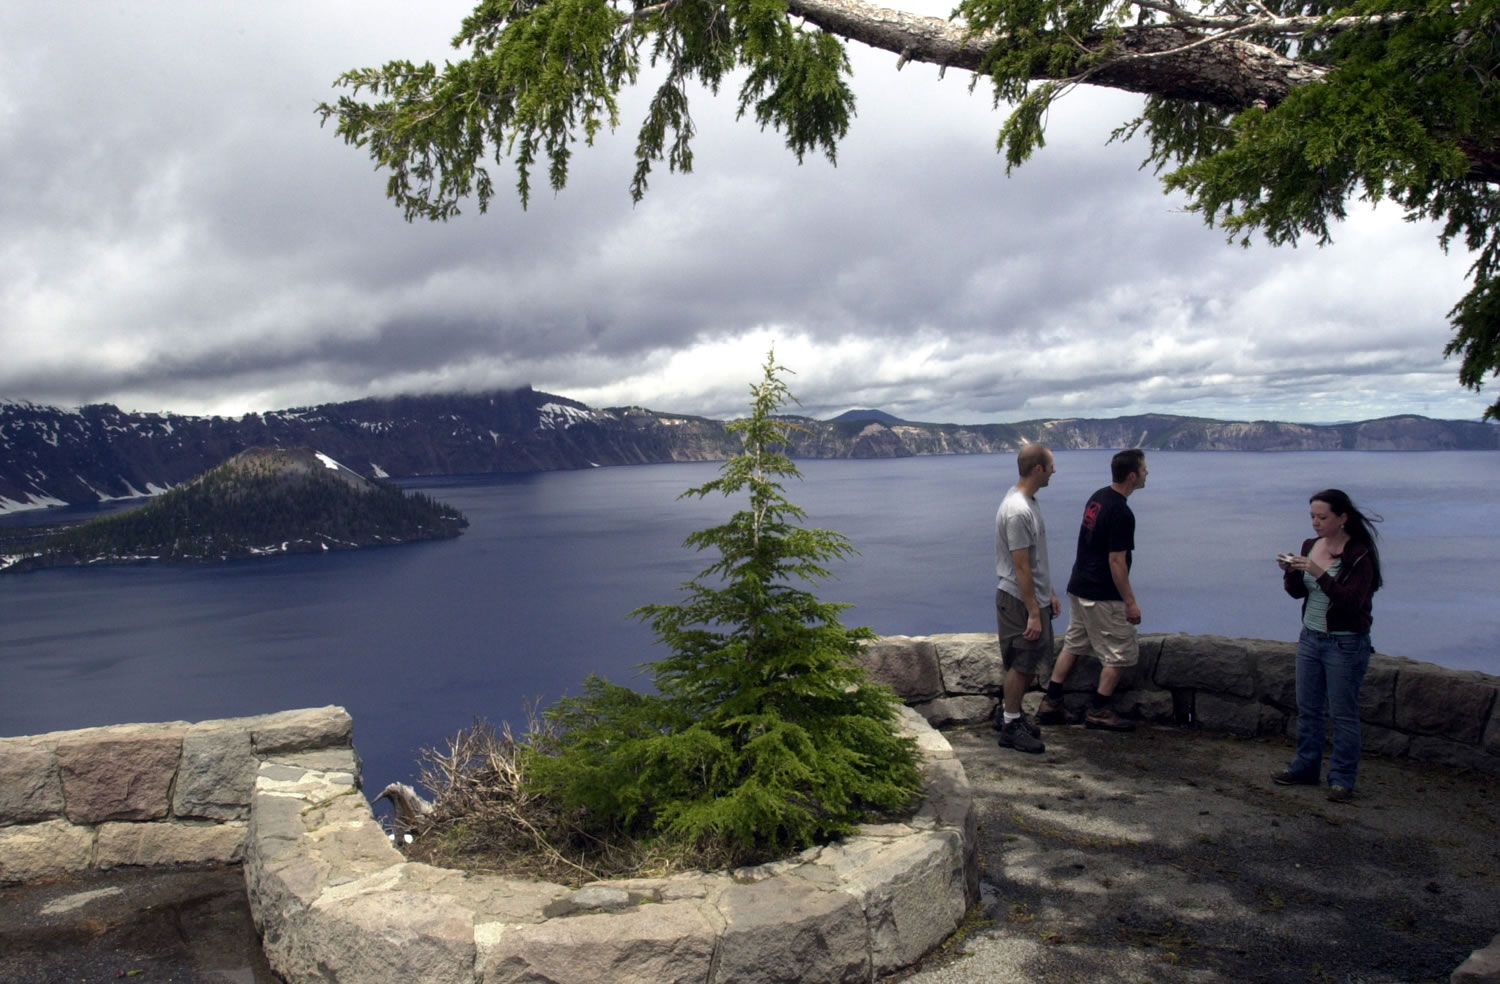 Tourists take in the view at Crater Lake National Park, Ore.